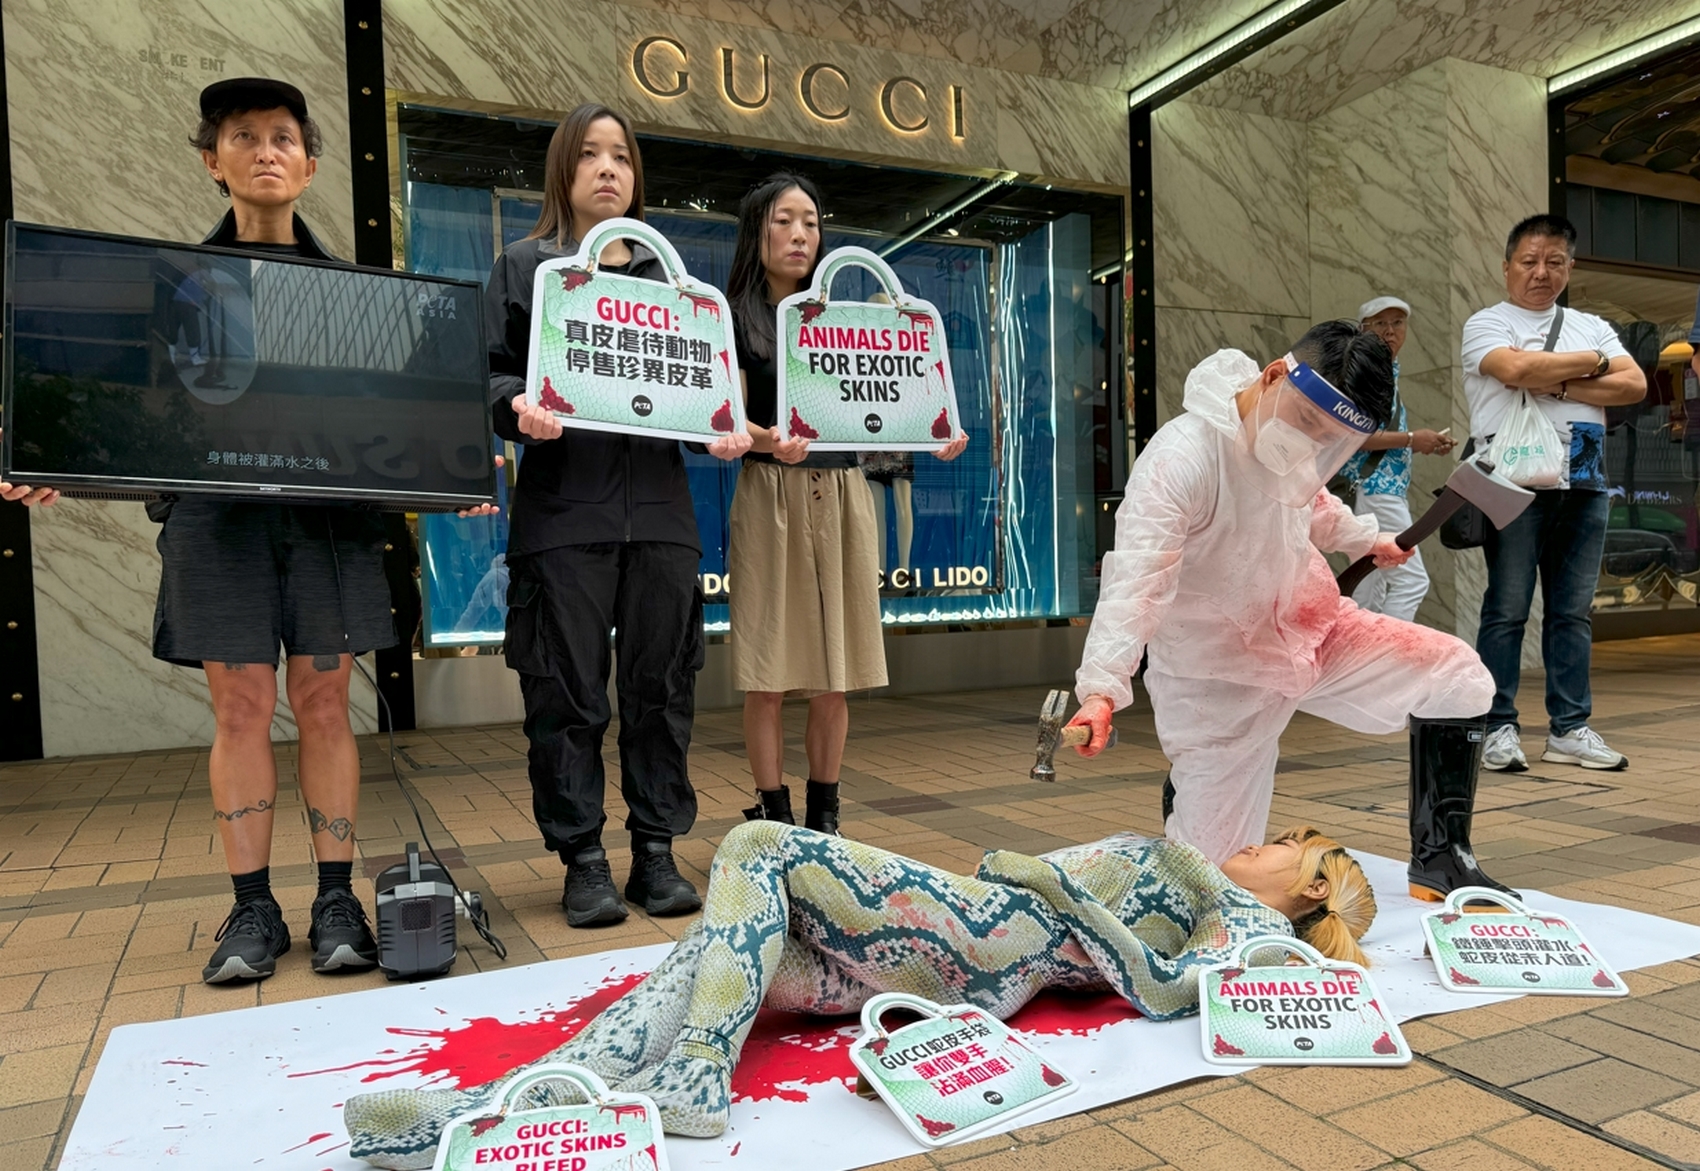 Activists from PETA protest the use of exotic skins by Gucci and parent firm Kering